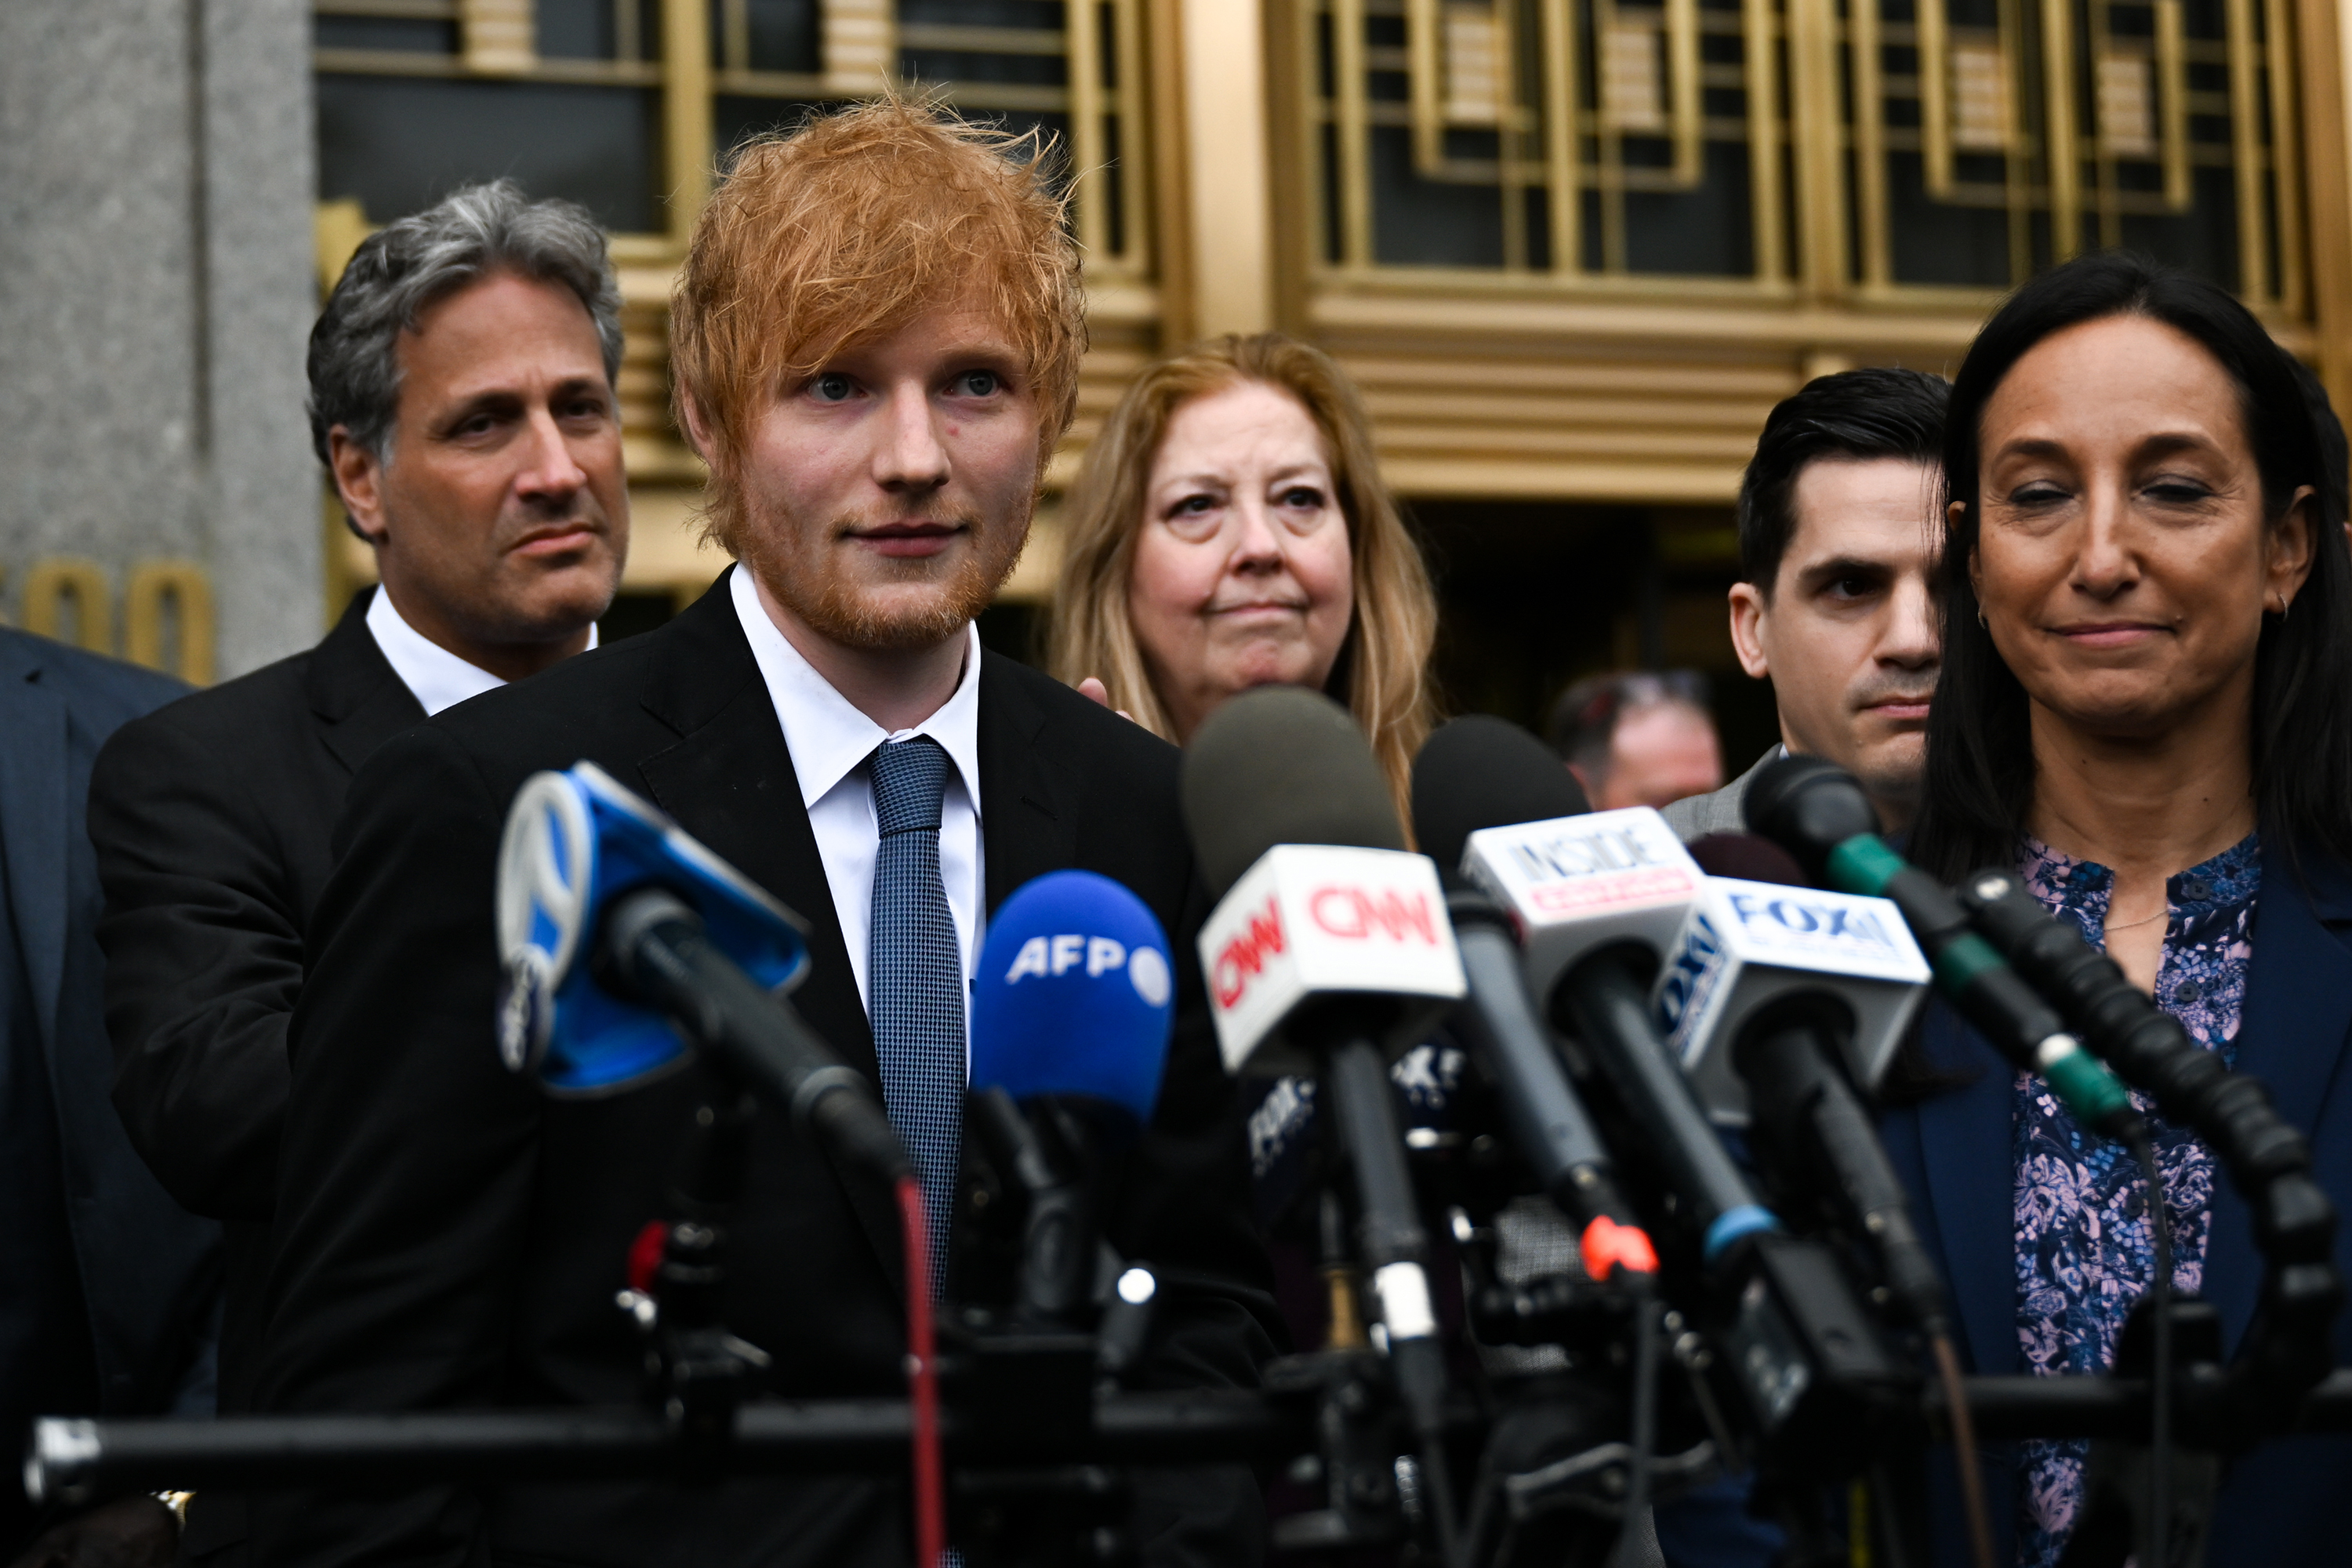 Ed Sheeran leaves Manhattan Federal Court and speaks to media after he was found not guilty in a music copyright trial on May 4, in New York City.